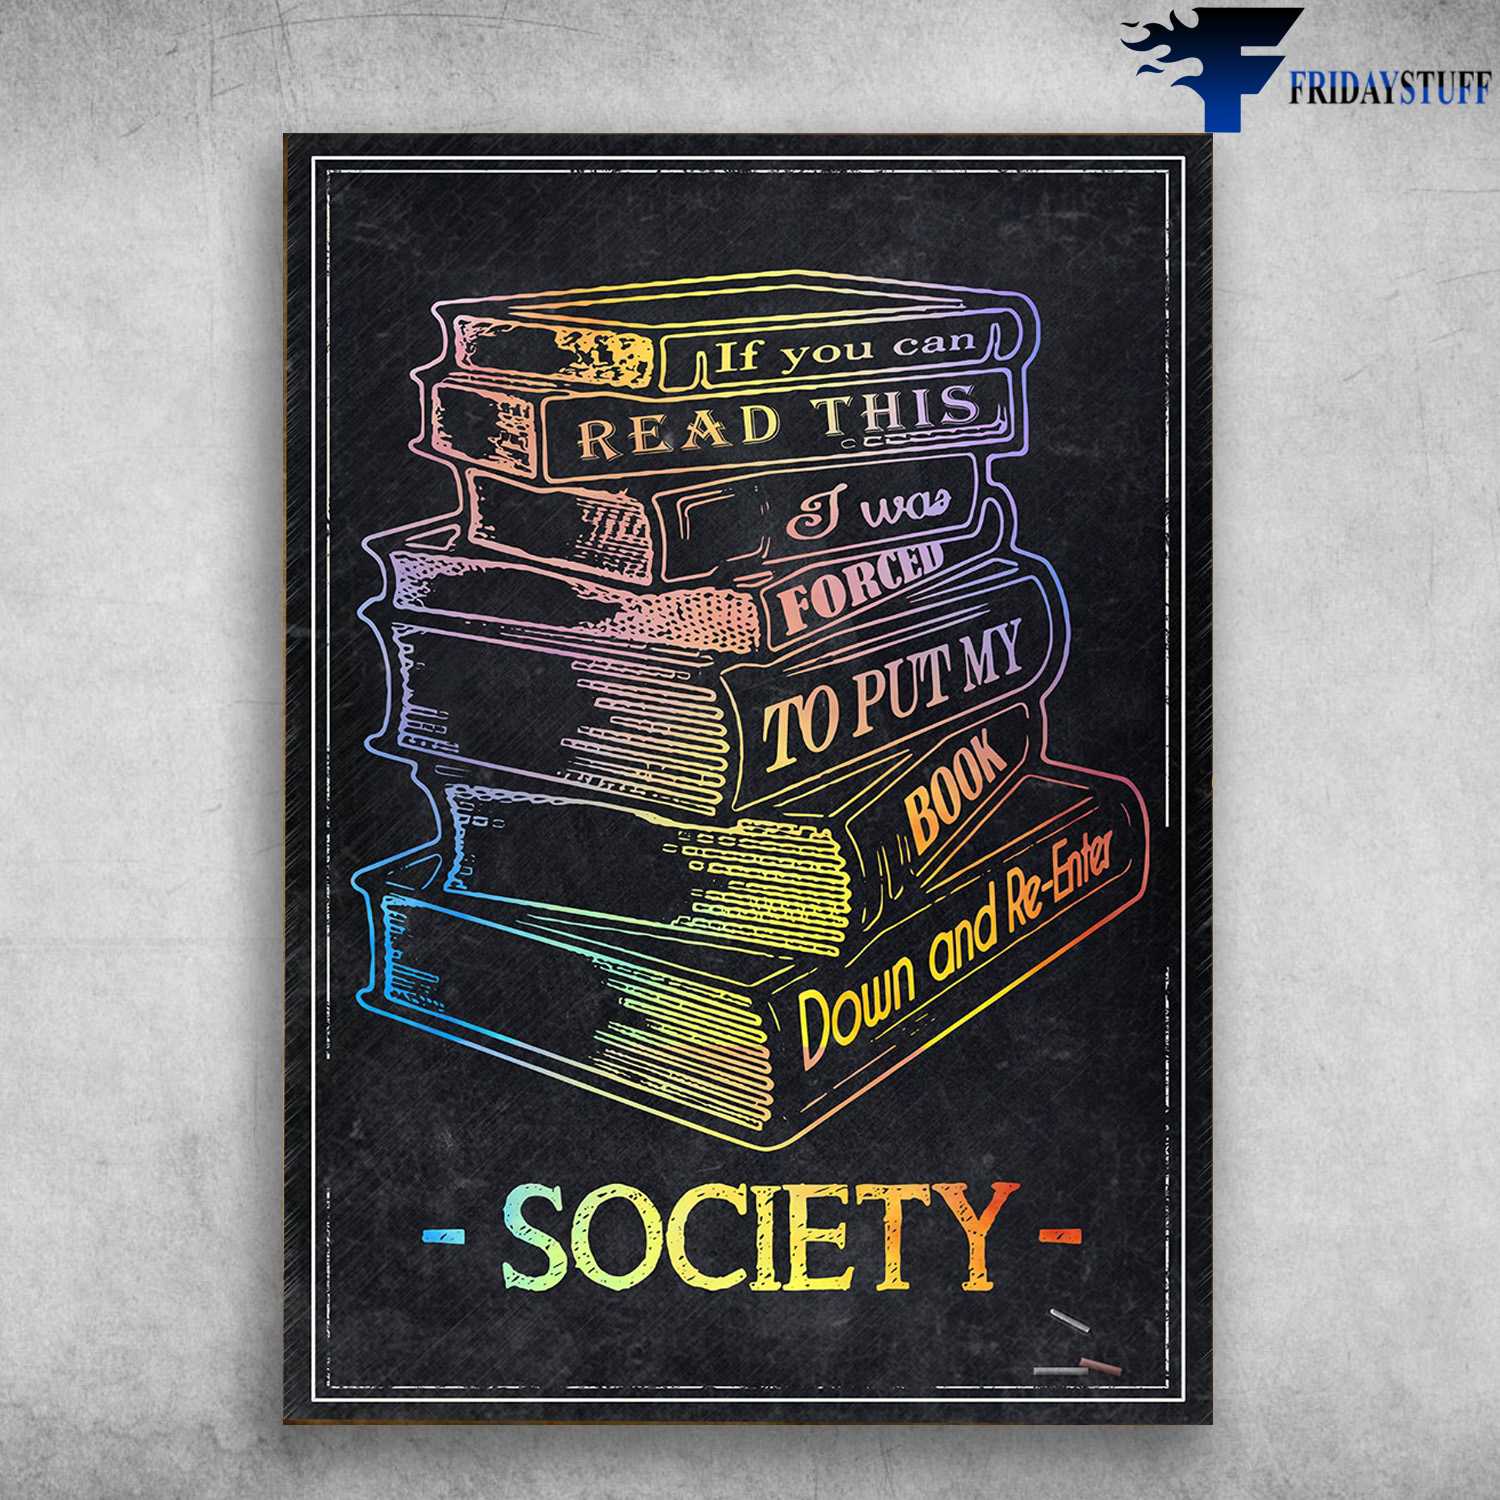 Book Lover - If You Can Read This, I Was To Put My Book, Down And Re-Enter, Society Poster